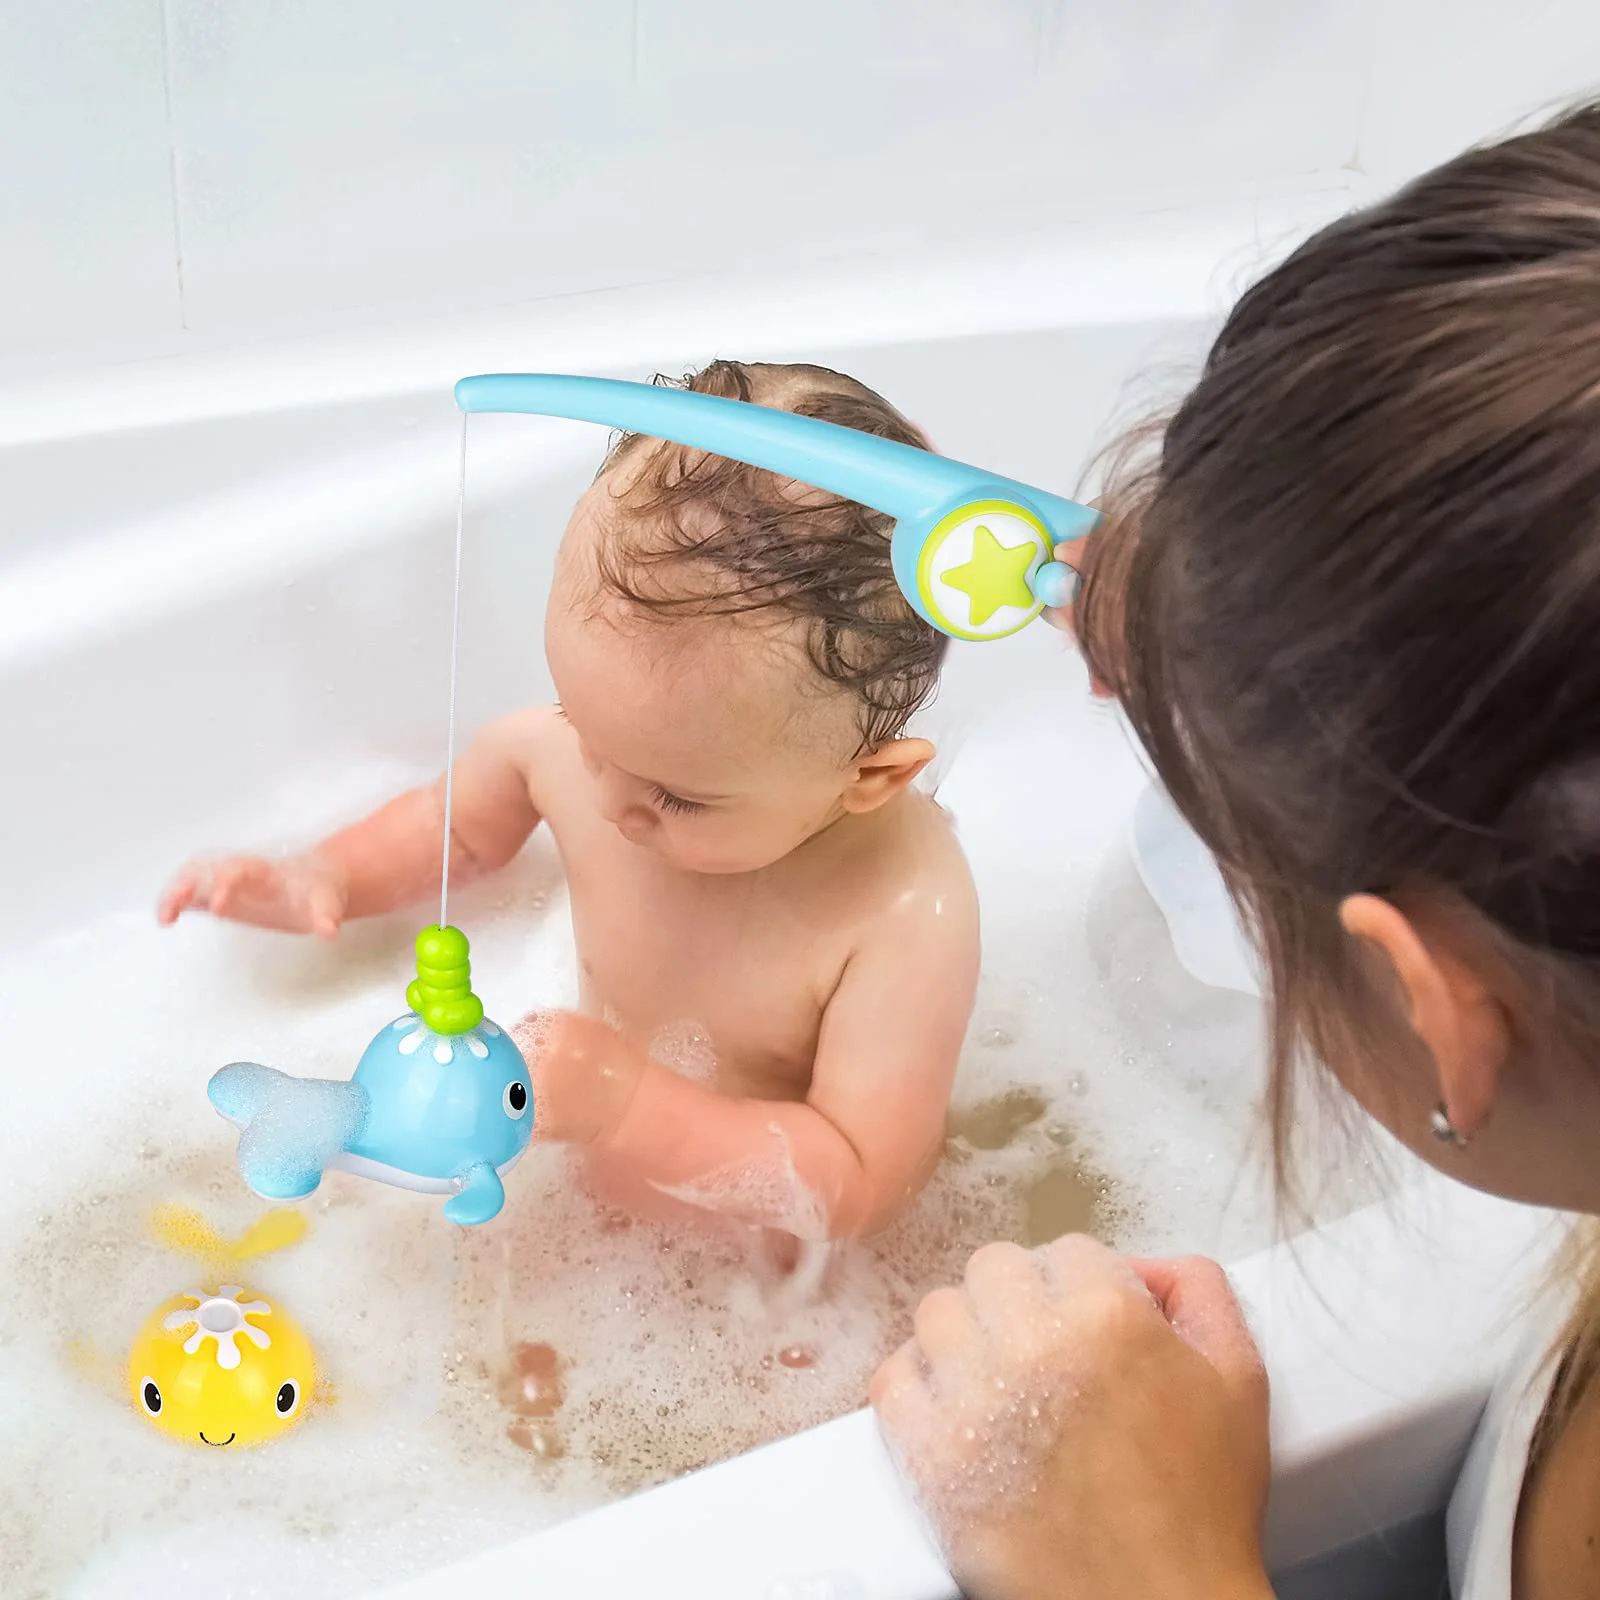 Munchkin Inflatable Safety Duck Tub Bath Toy Baby Child Play Kid Stuff  Infants